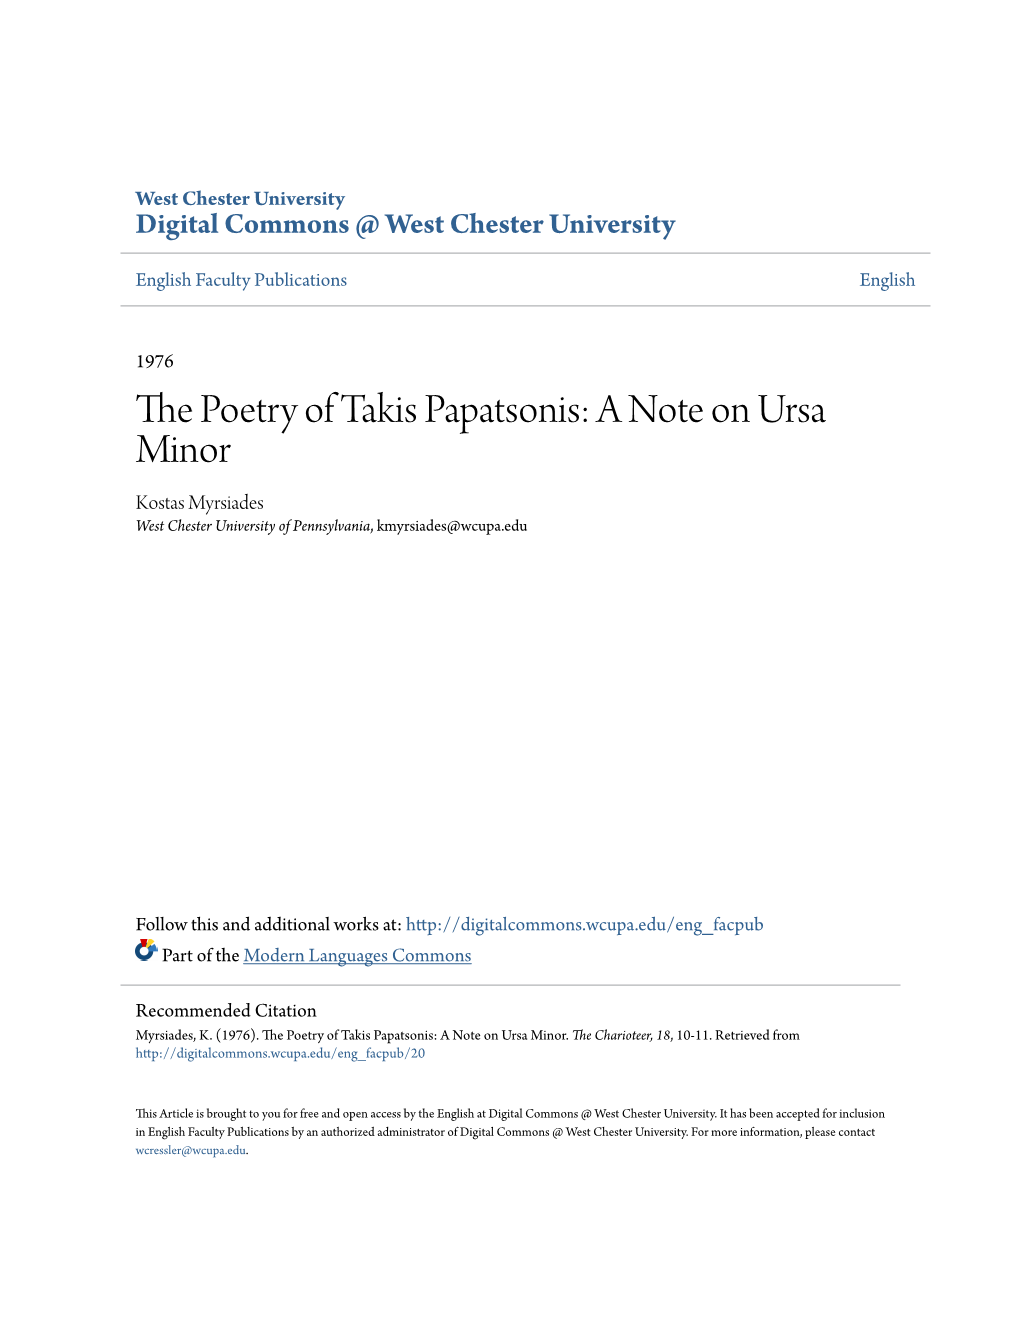 The Poetry of Takis Papatsonis: a Note on Ursa Minor